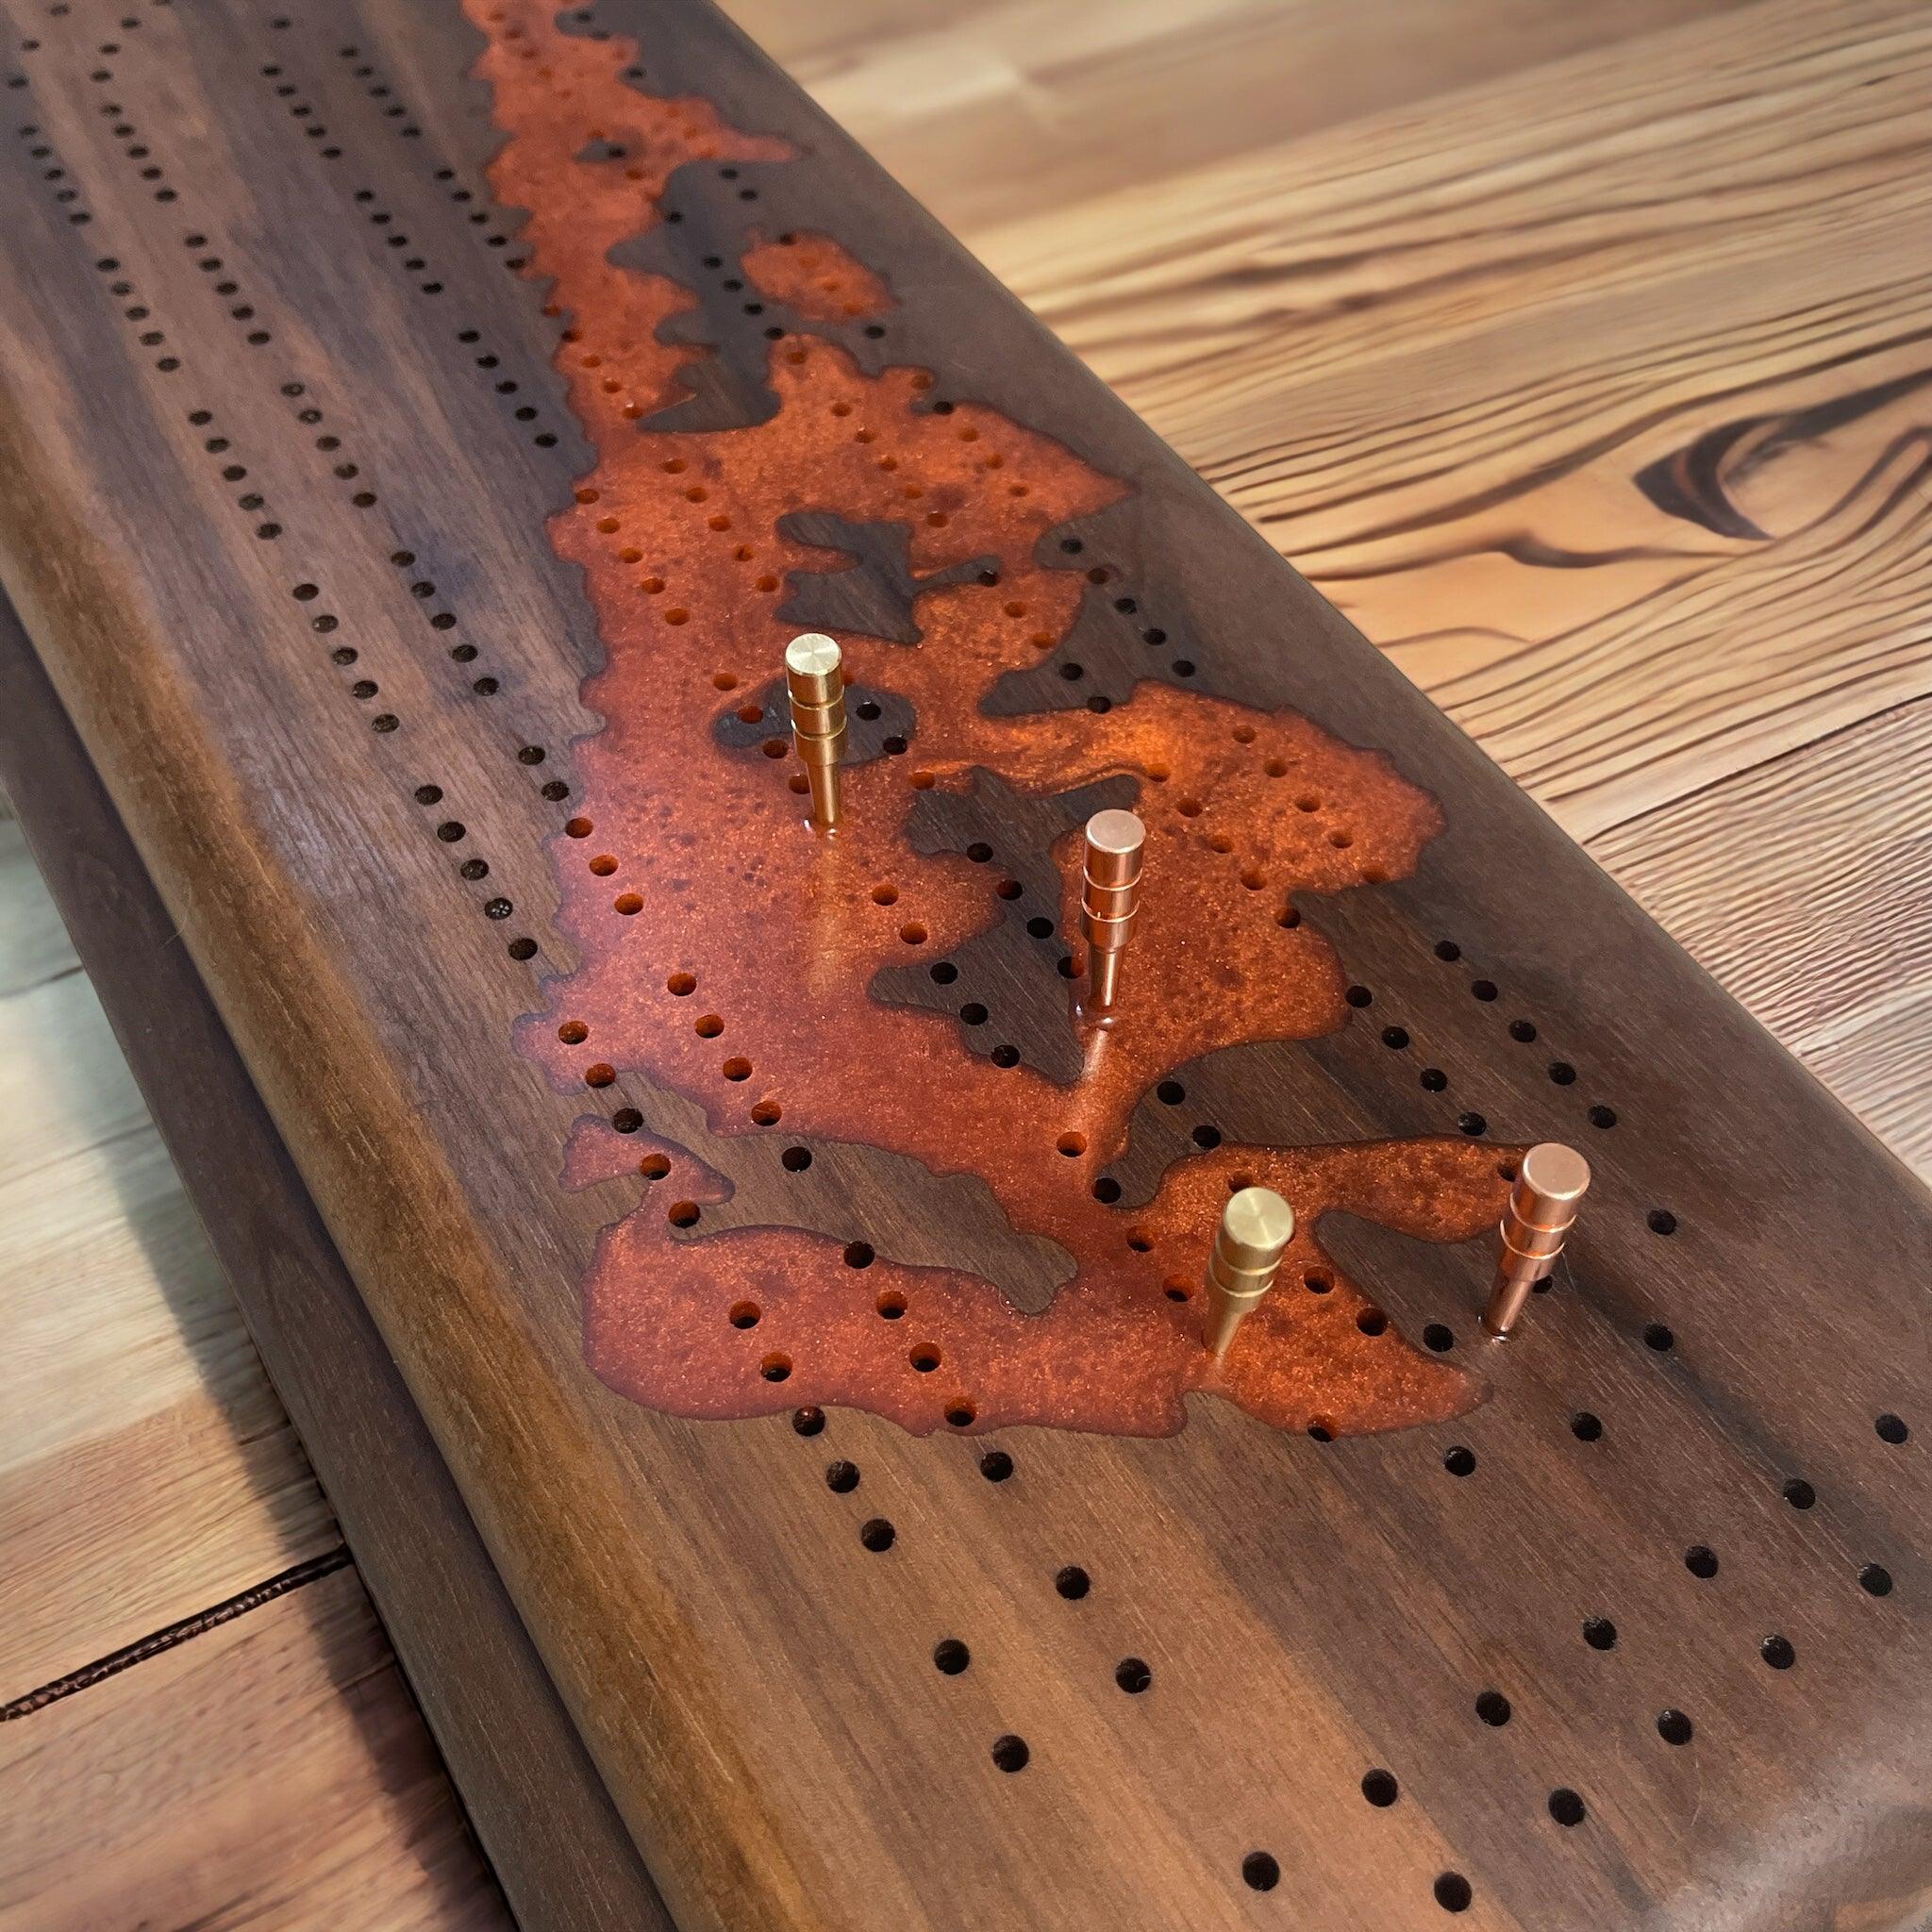 Manitoulin cribbage board - We have the wood